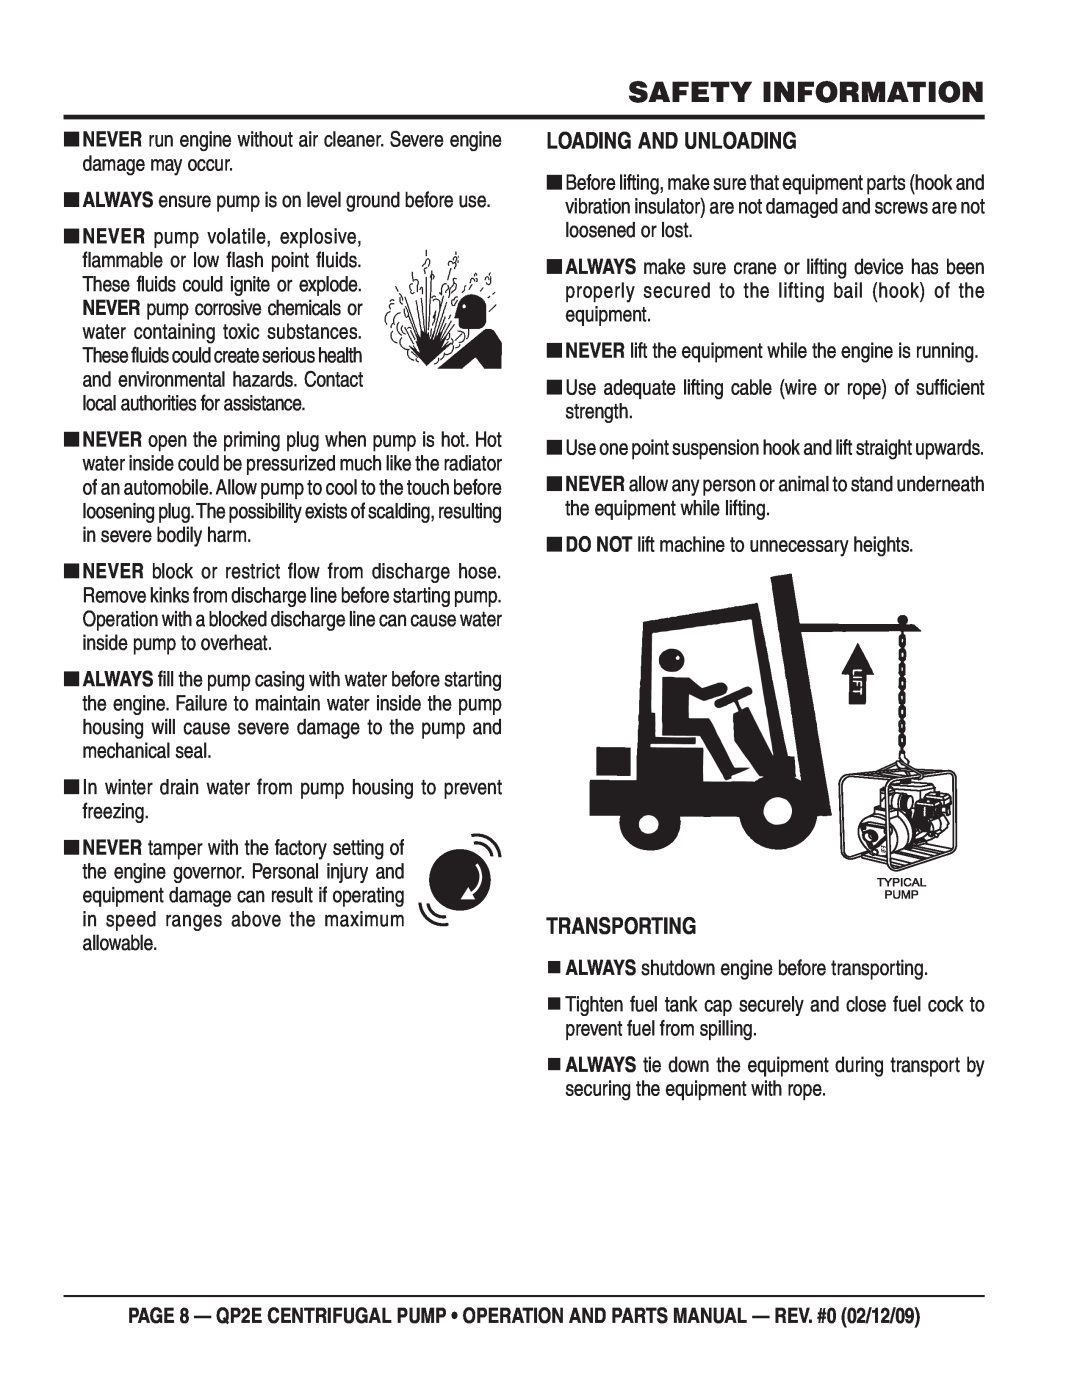 Multiquip QP2E manual Loading And Unloading, Transporting, Safety Information 